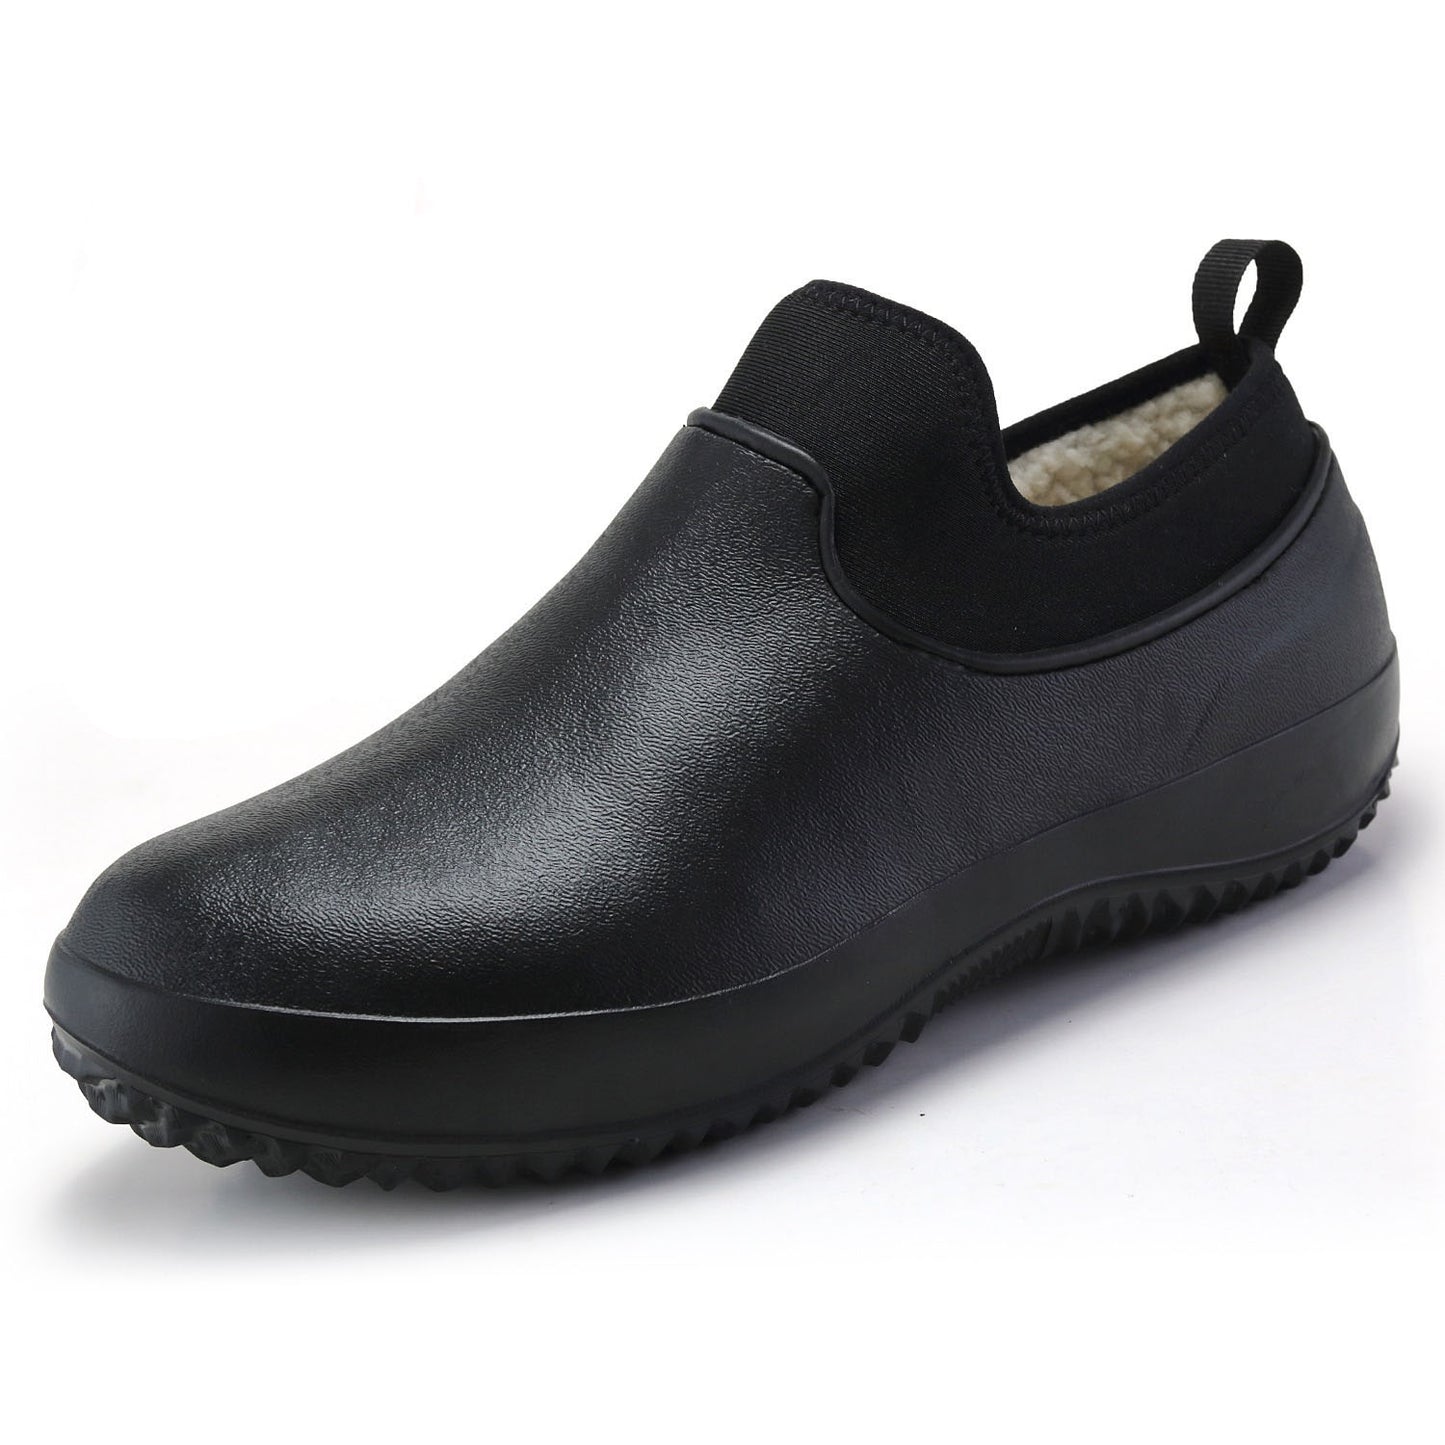 Men's Loafers & Slip-Ons Comfort Shoes Sporty Casual